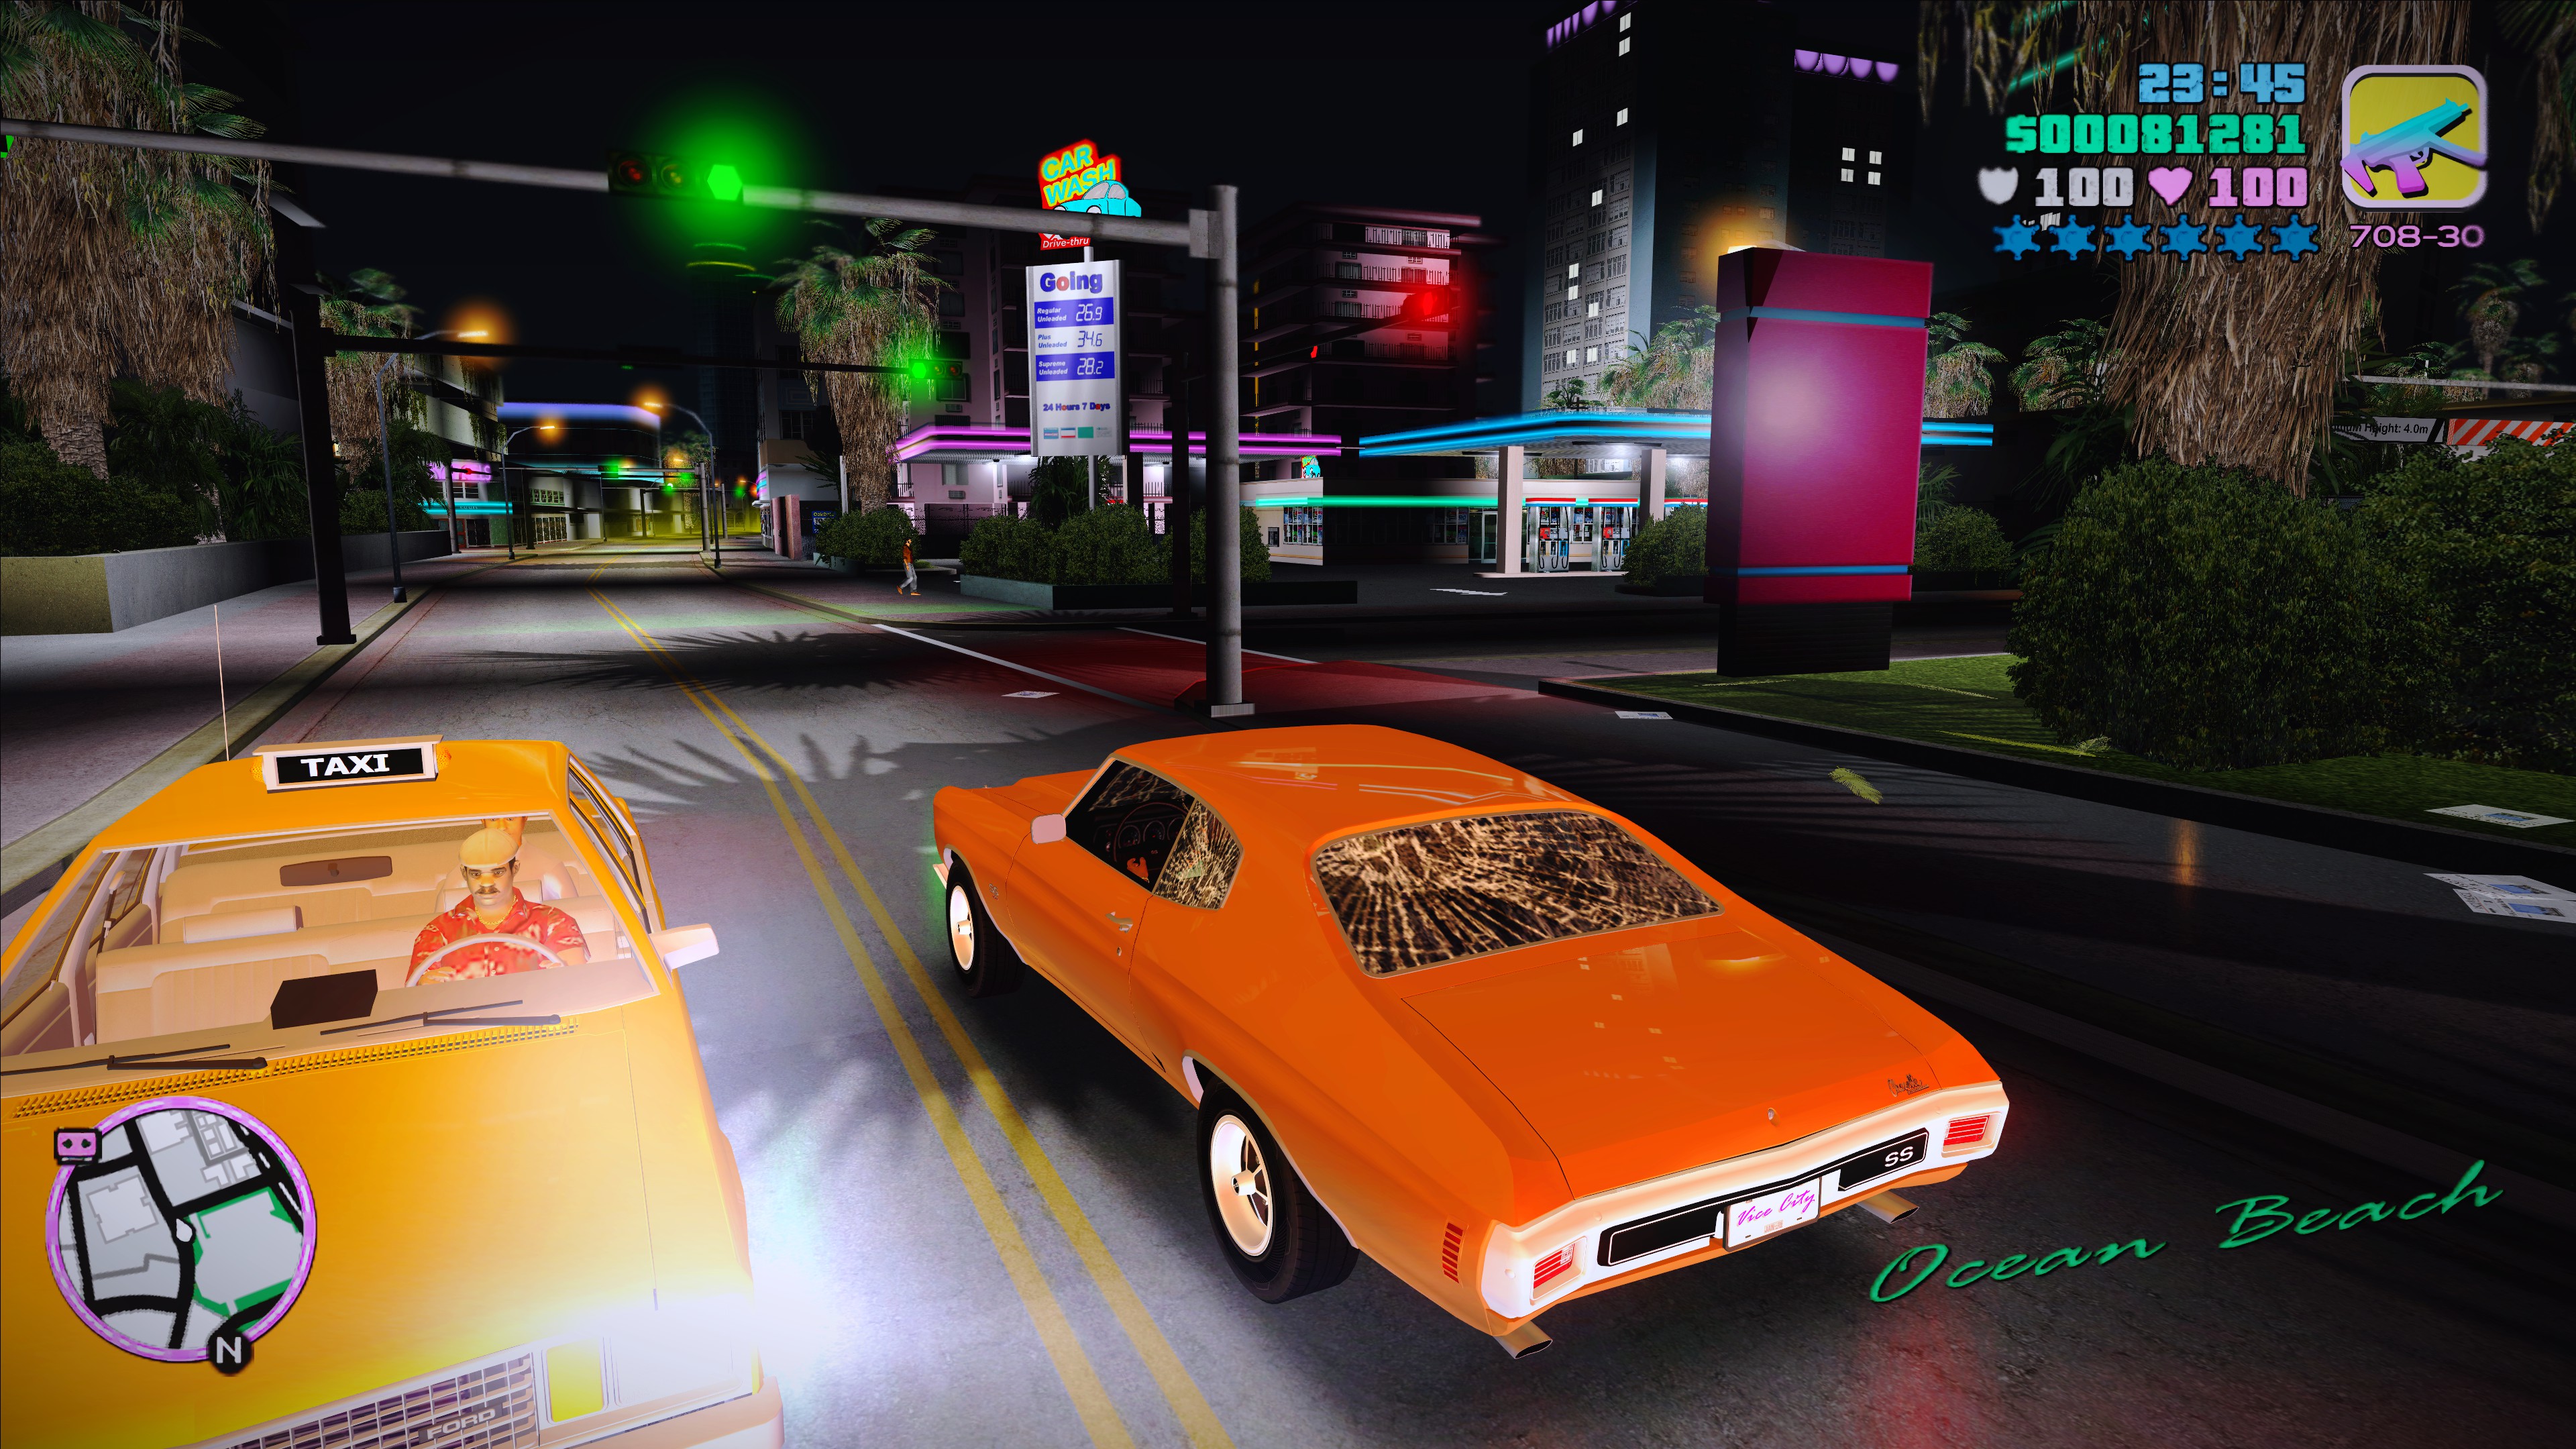 Image 1 Gta Vice City Remastered With Realistic Car Pack Mod For Grand Theft Auto Vice City 